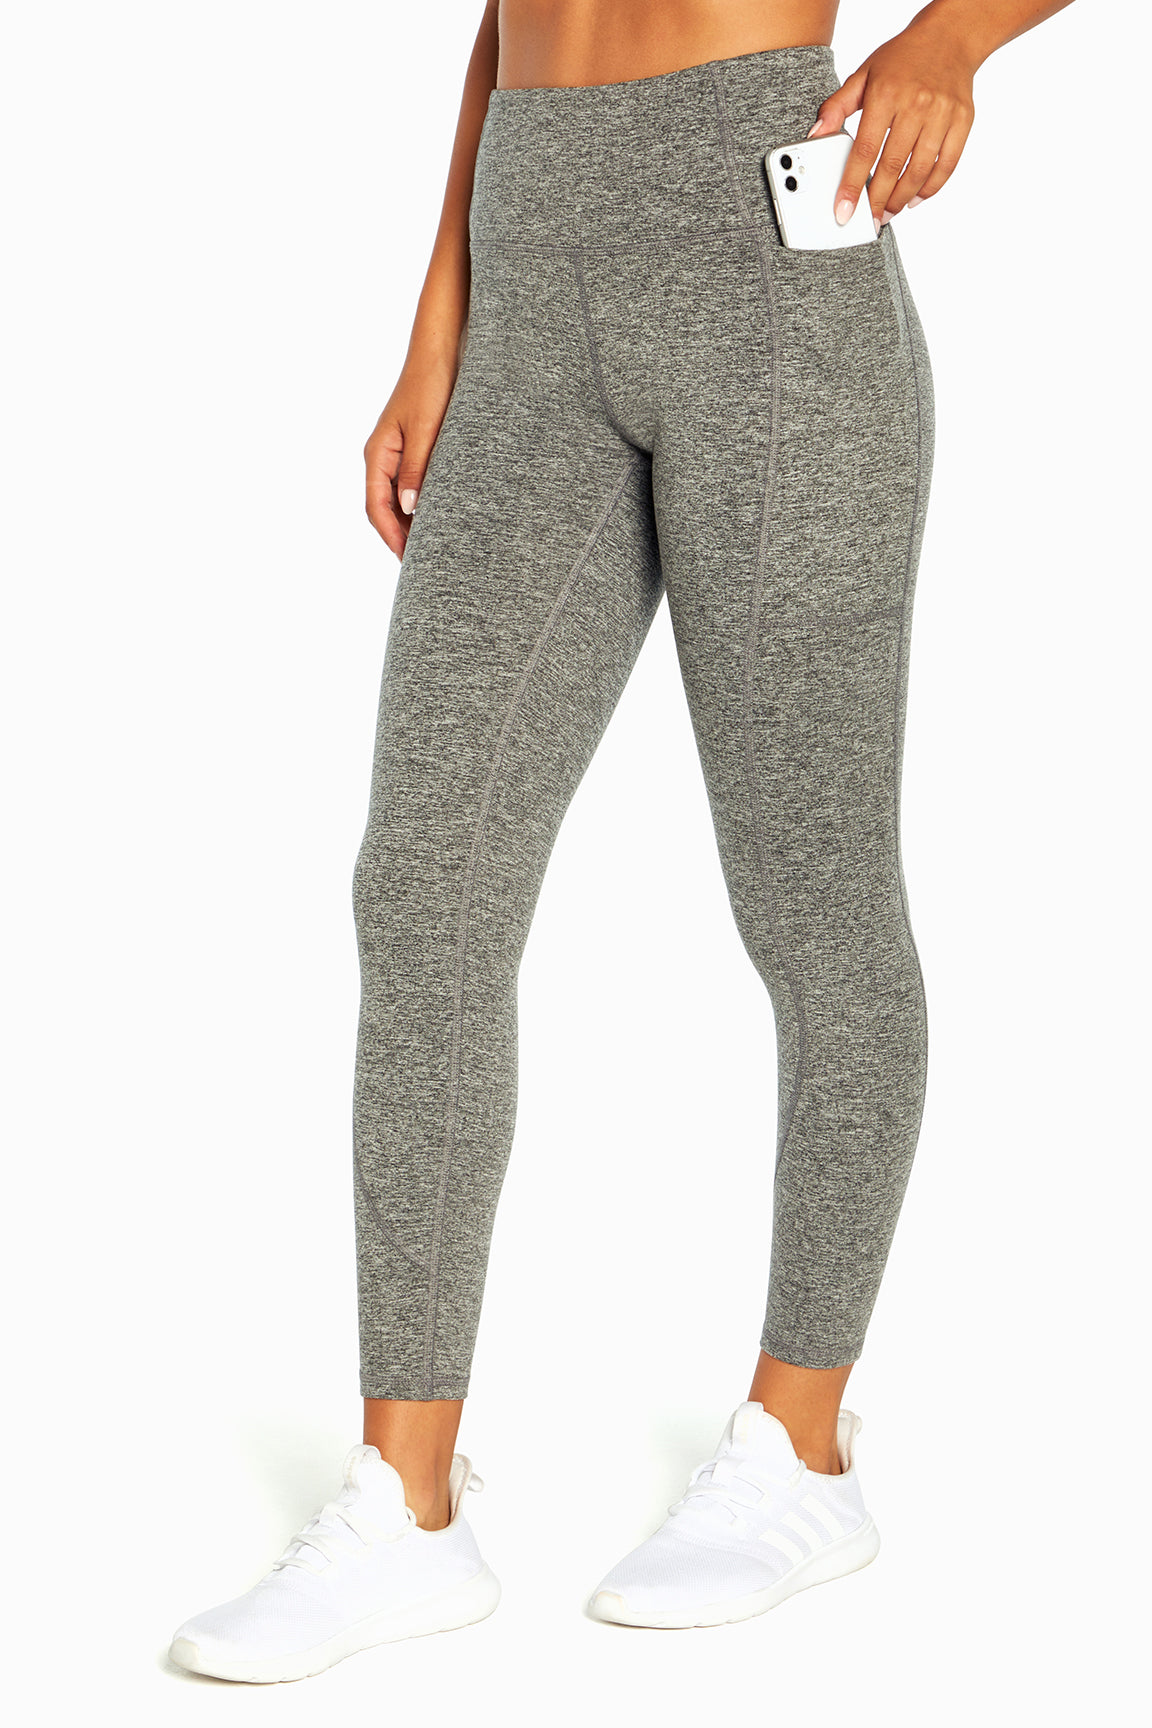 Balance Collection Leggings Black Size L - $25 - From Olivia